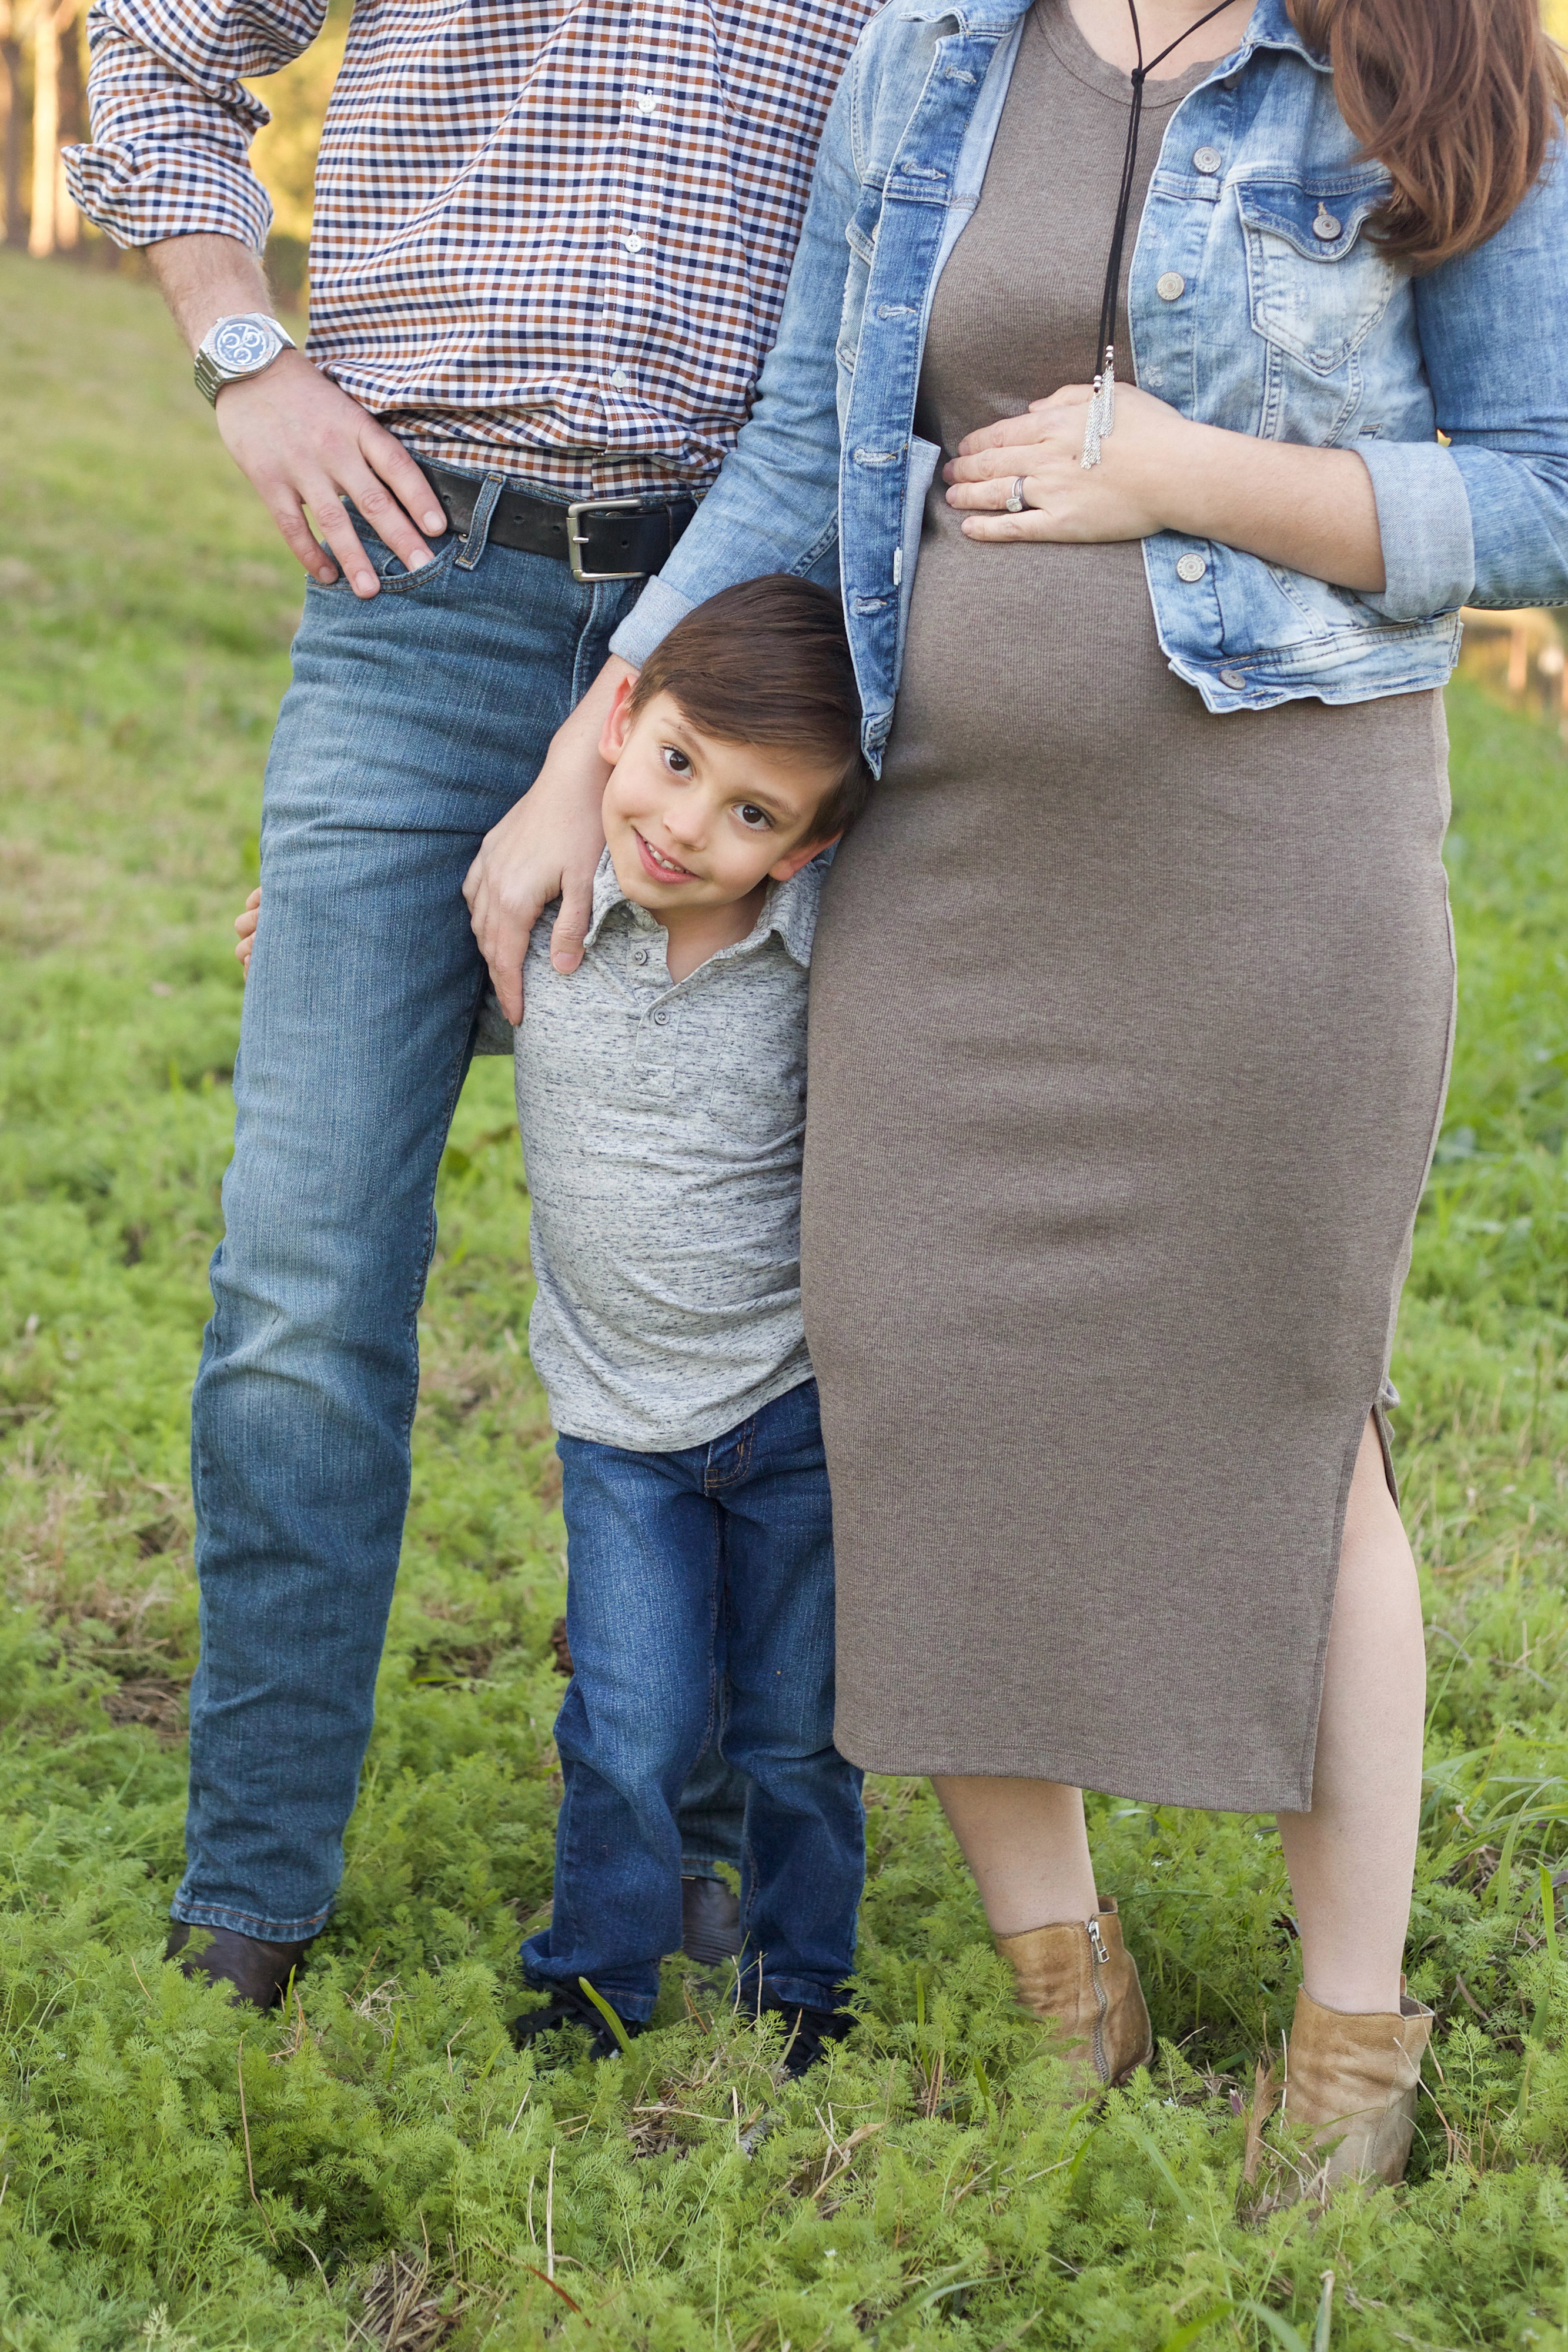 View More: http://marlocarrollphotography.pass.us/cammeo-family